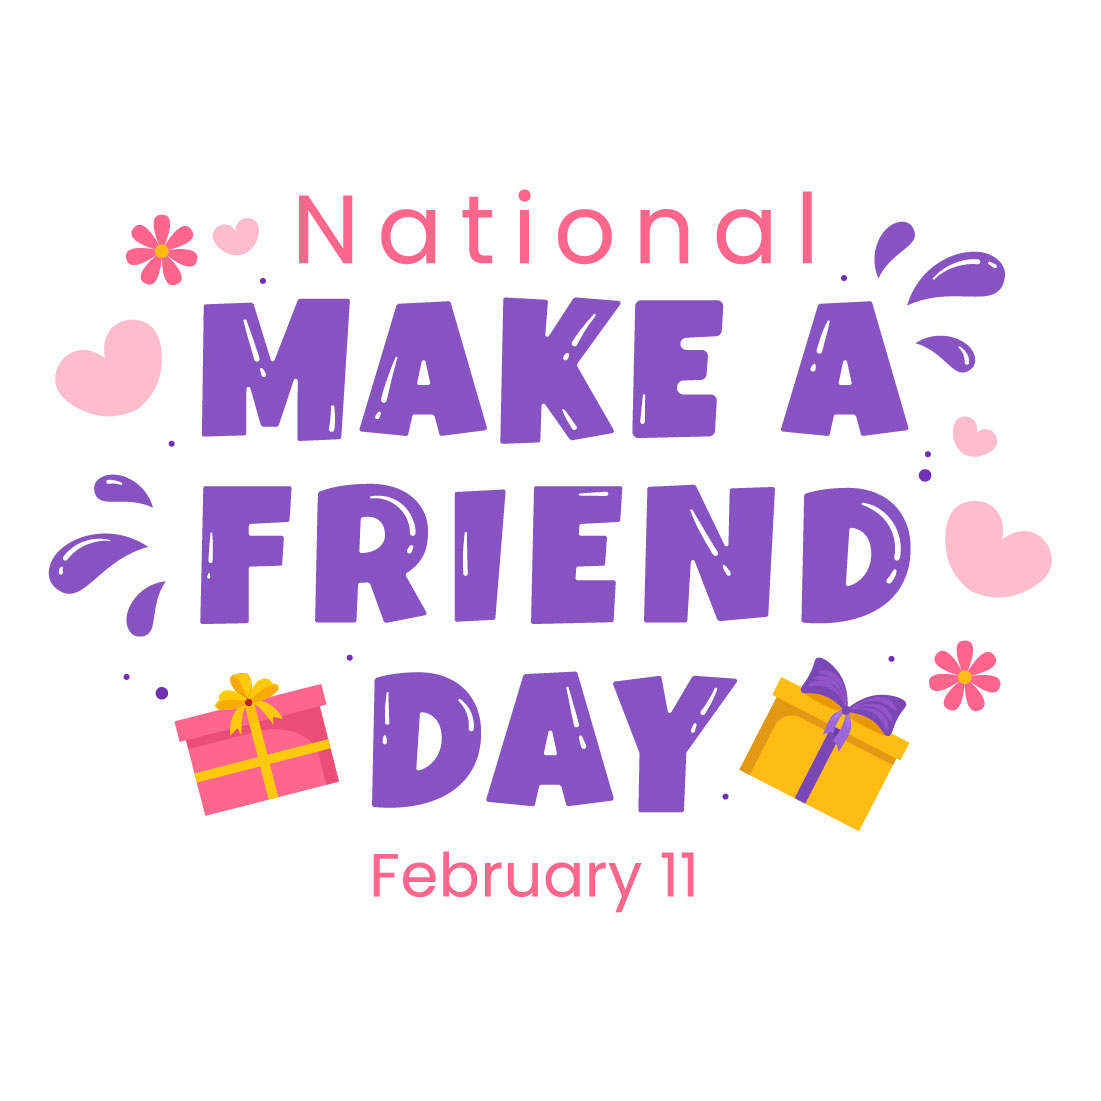 Friends Day Design cover image.